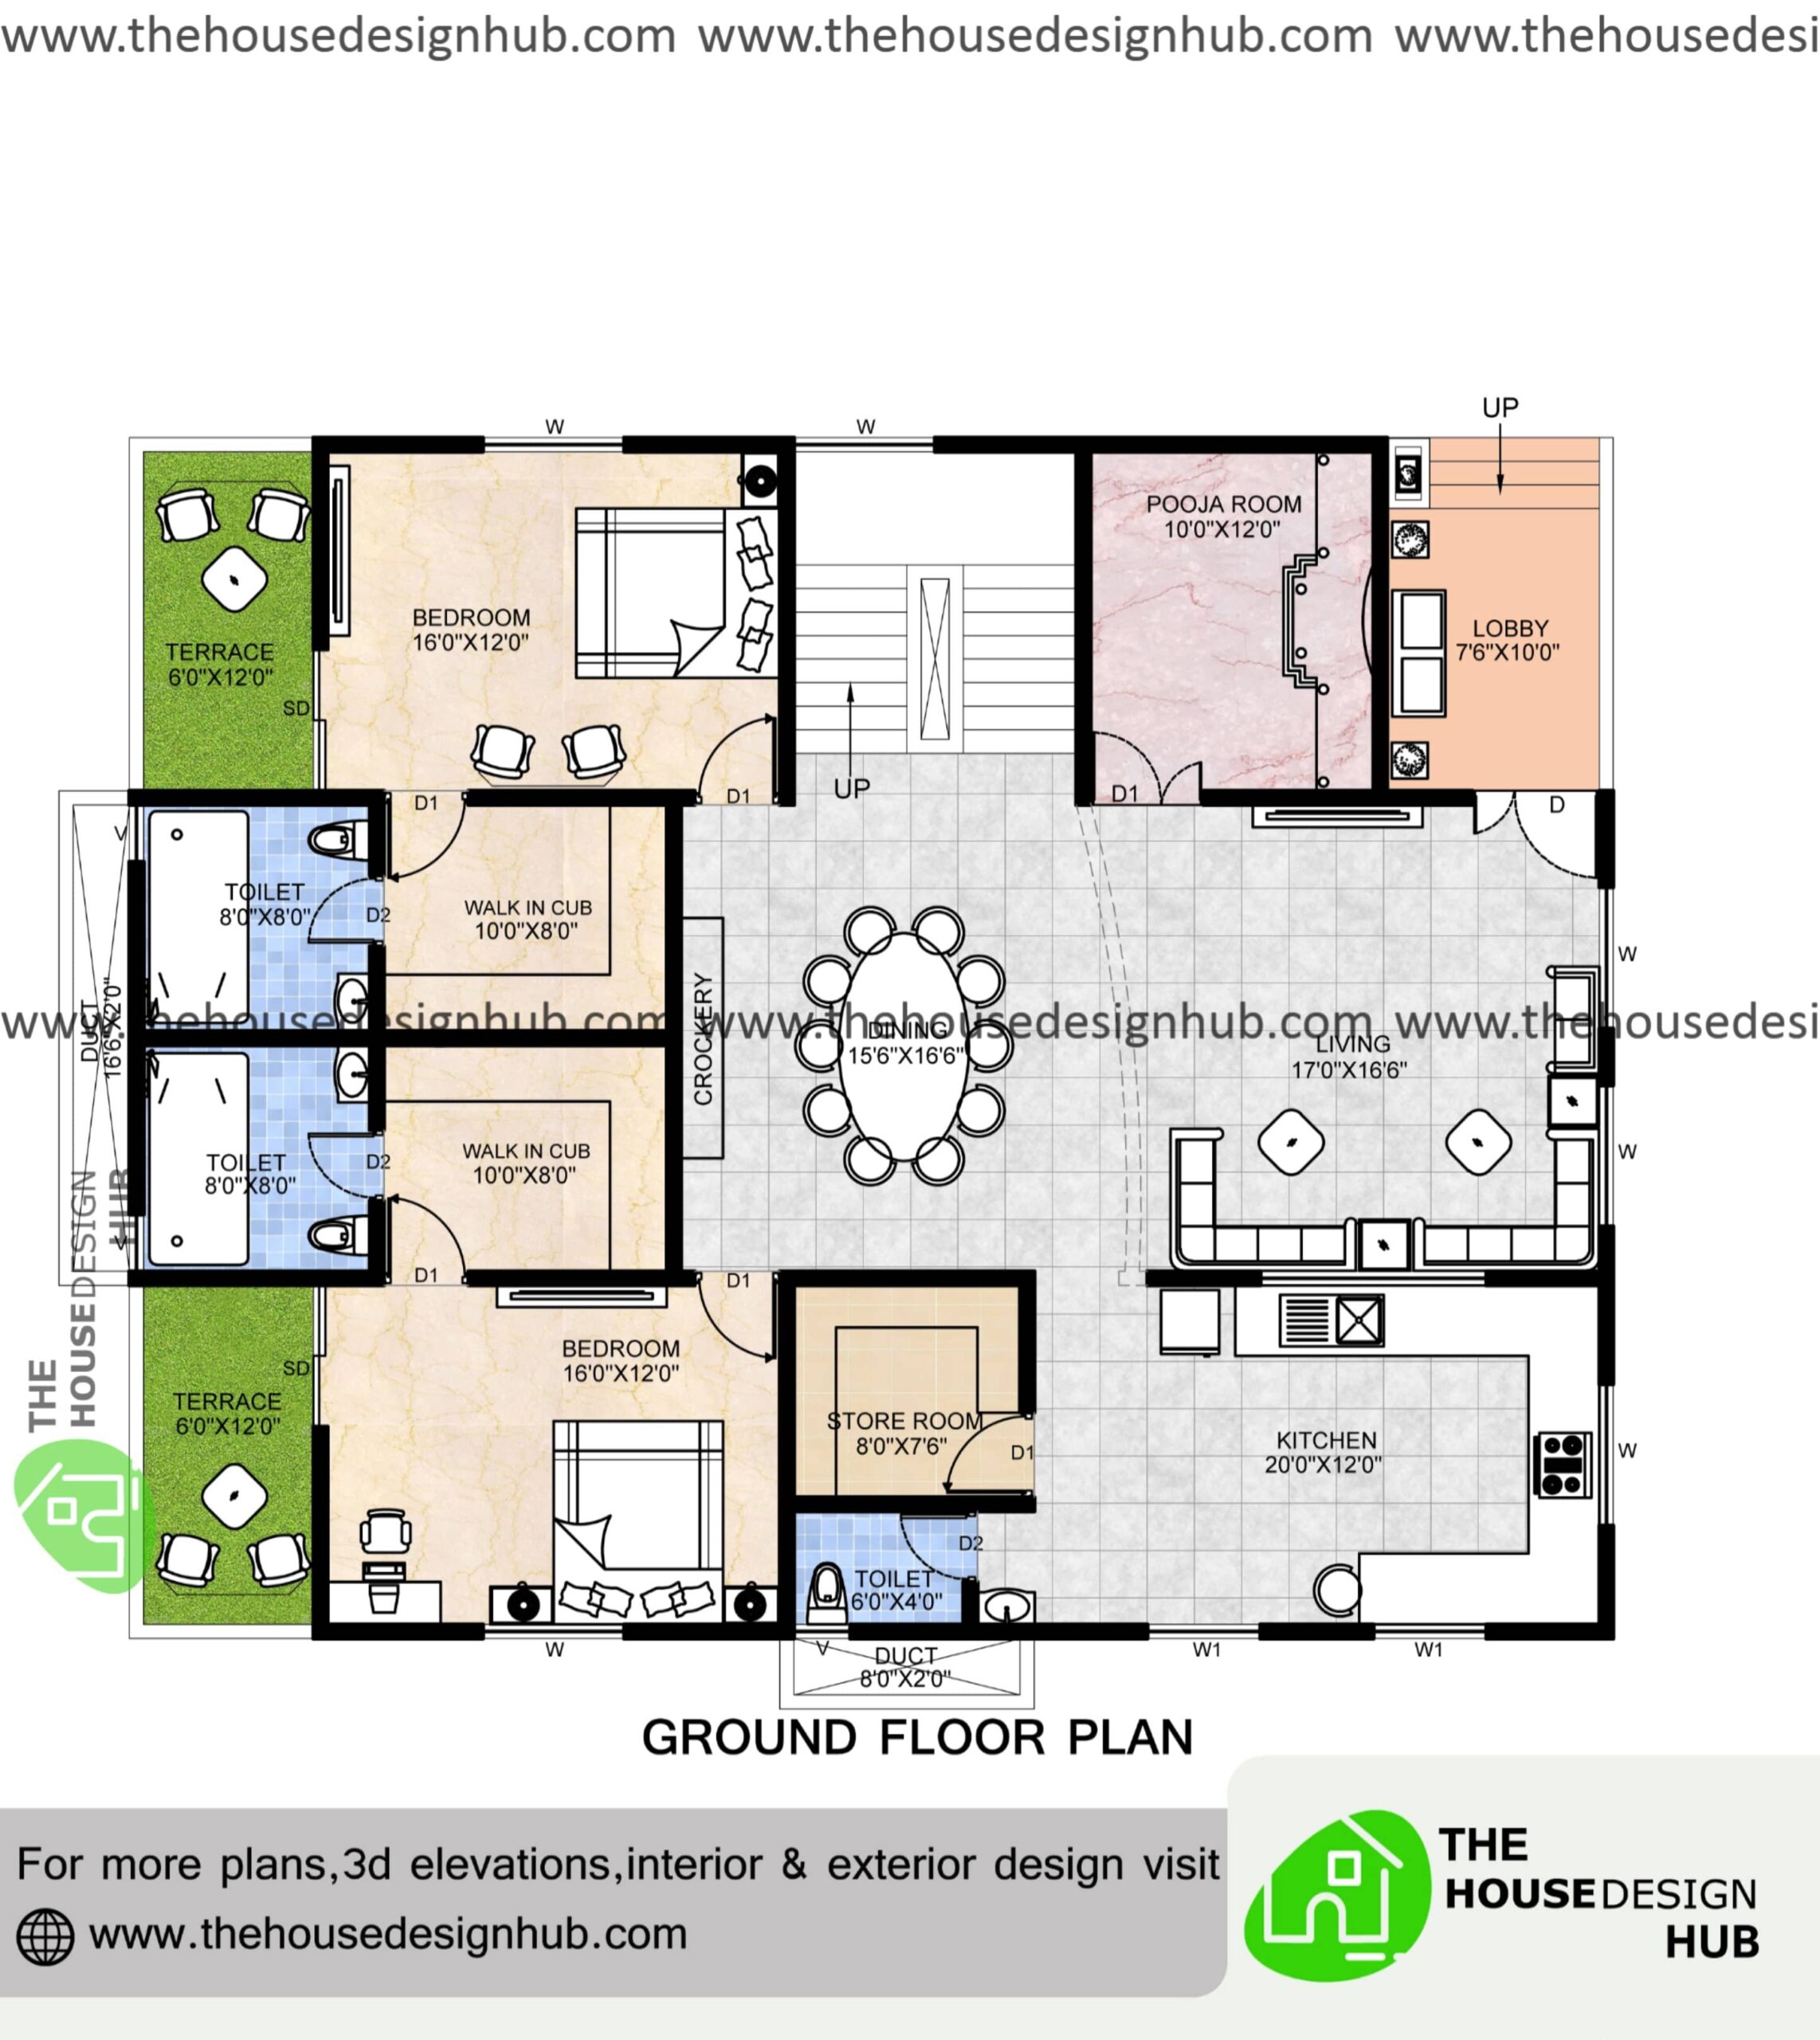 2 bedroom house plans indian style